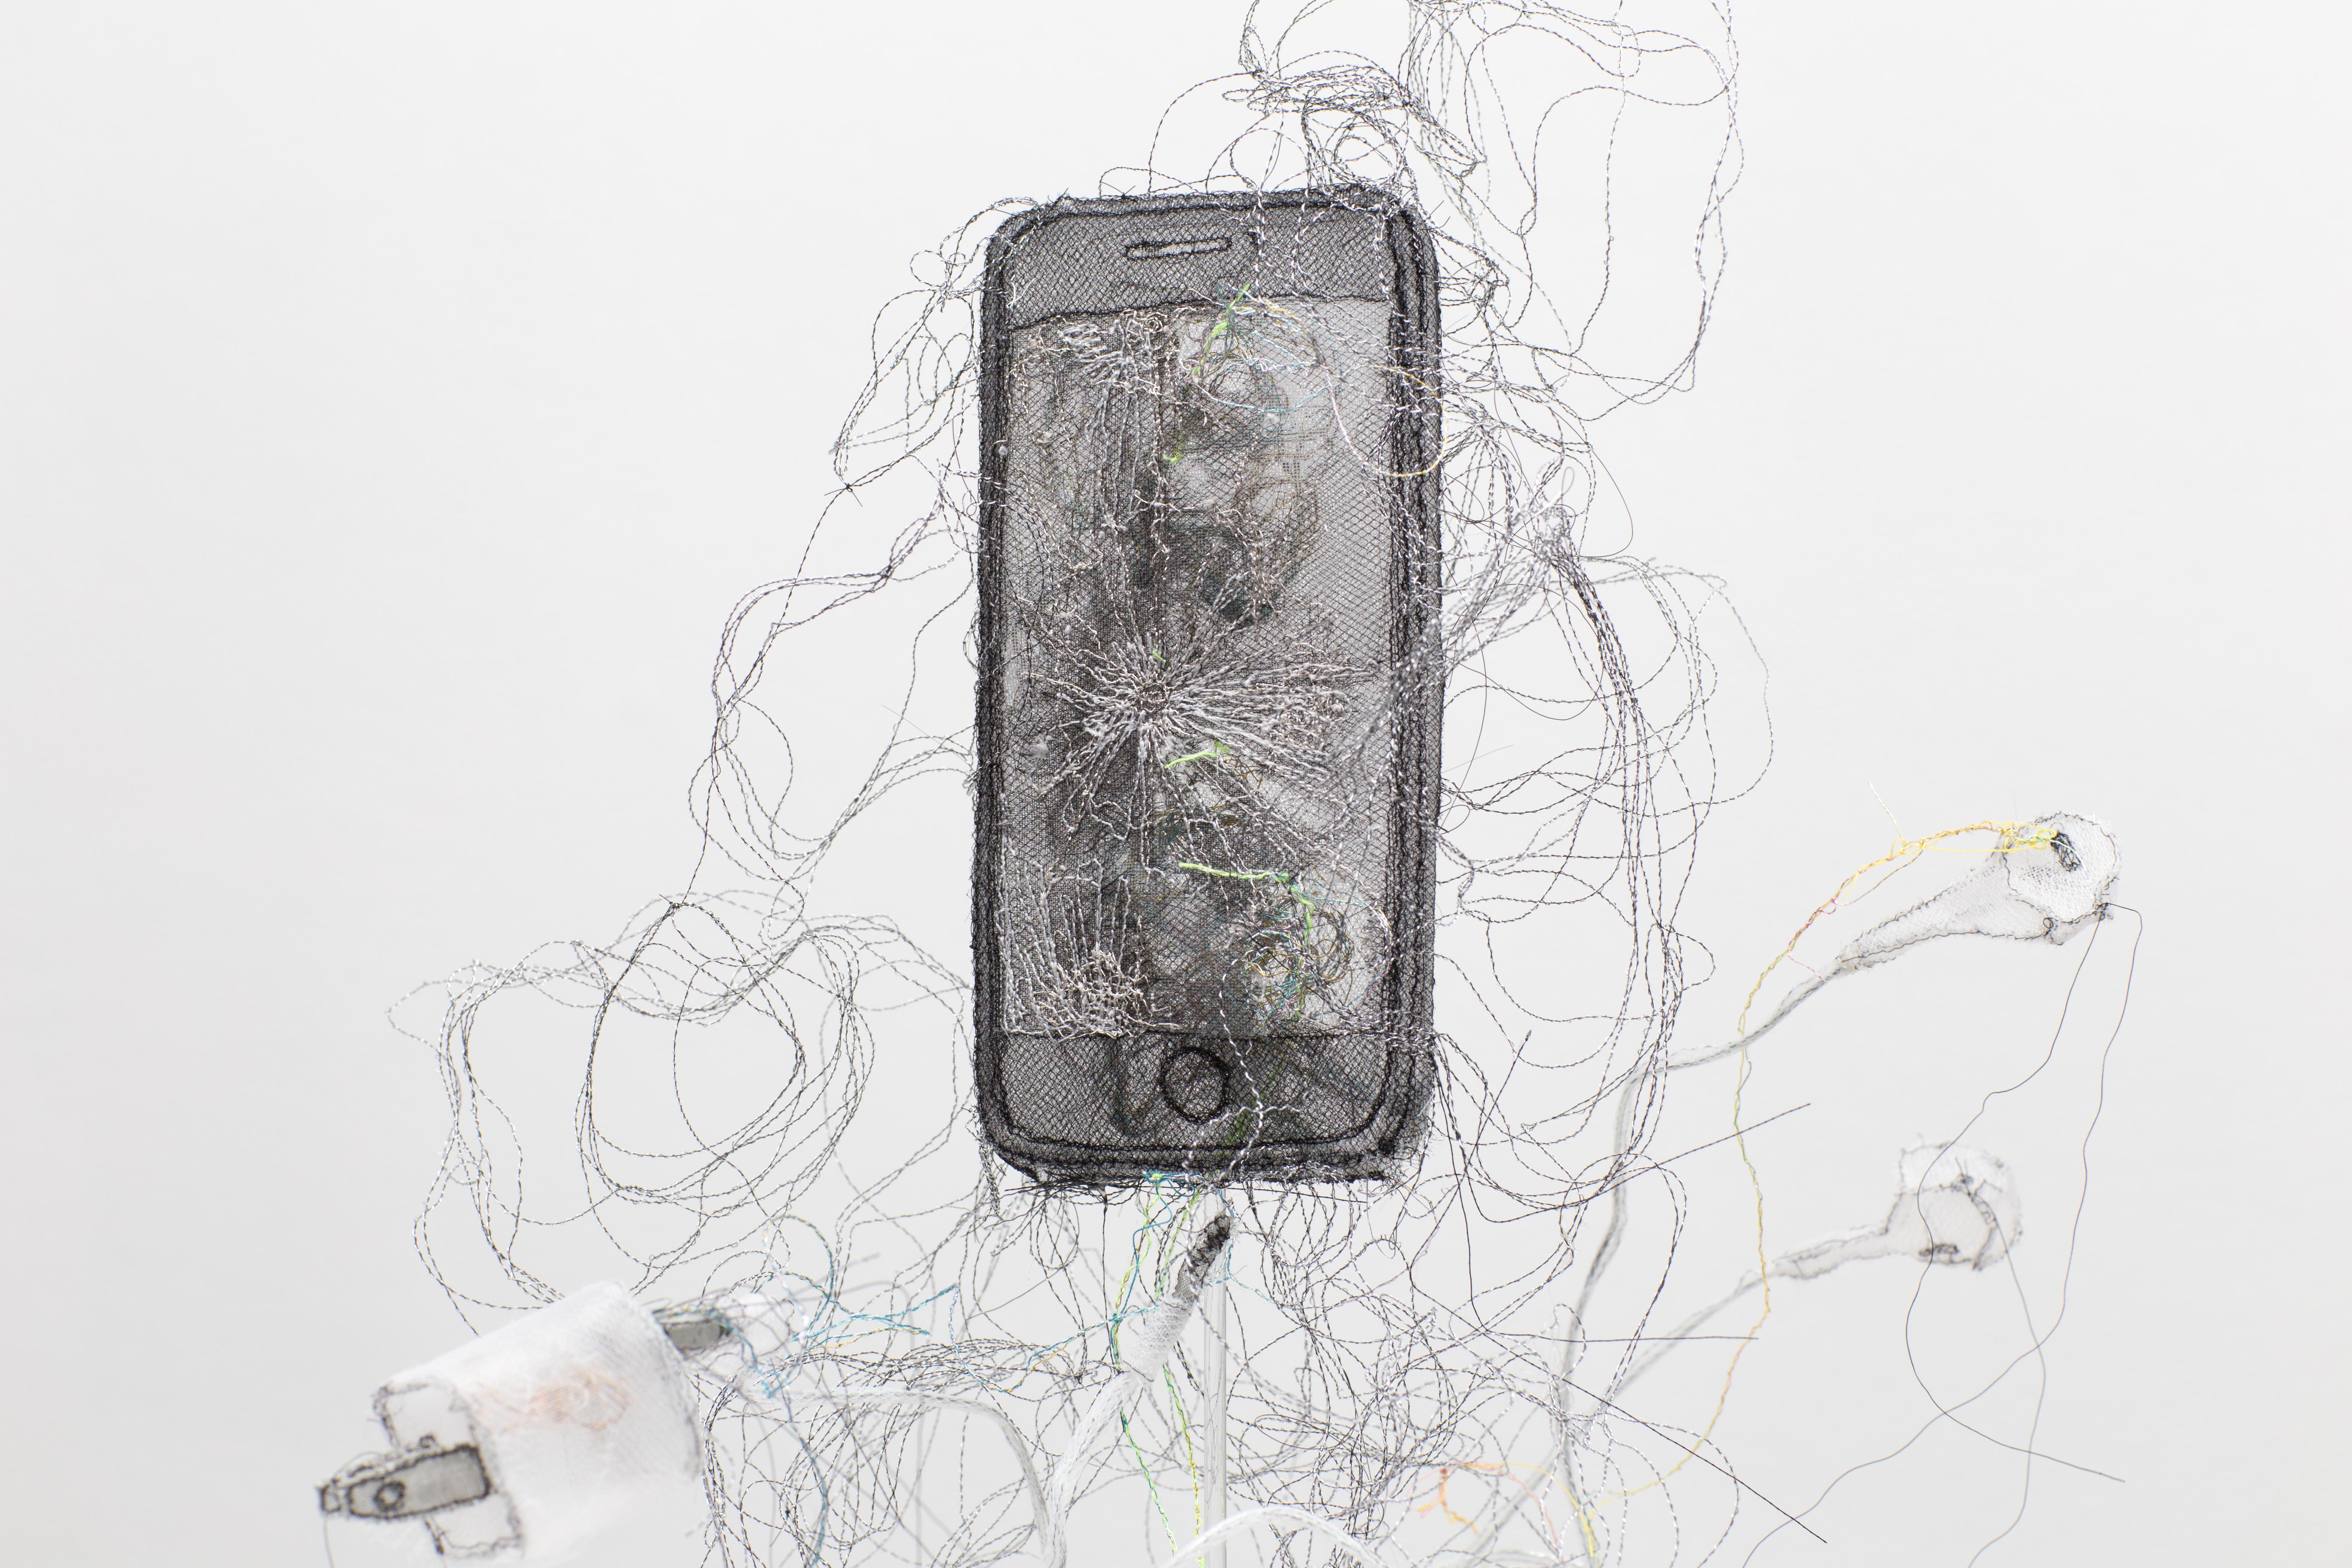 Jannick Deslauriers Figurative Sculpture - Phone from the series Relic: Body Extention